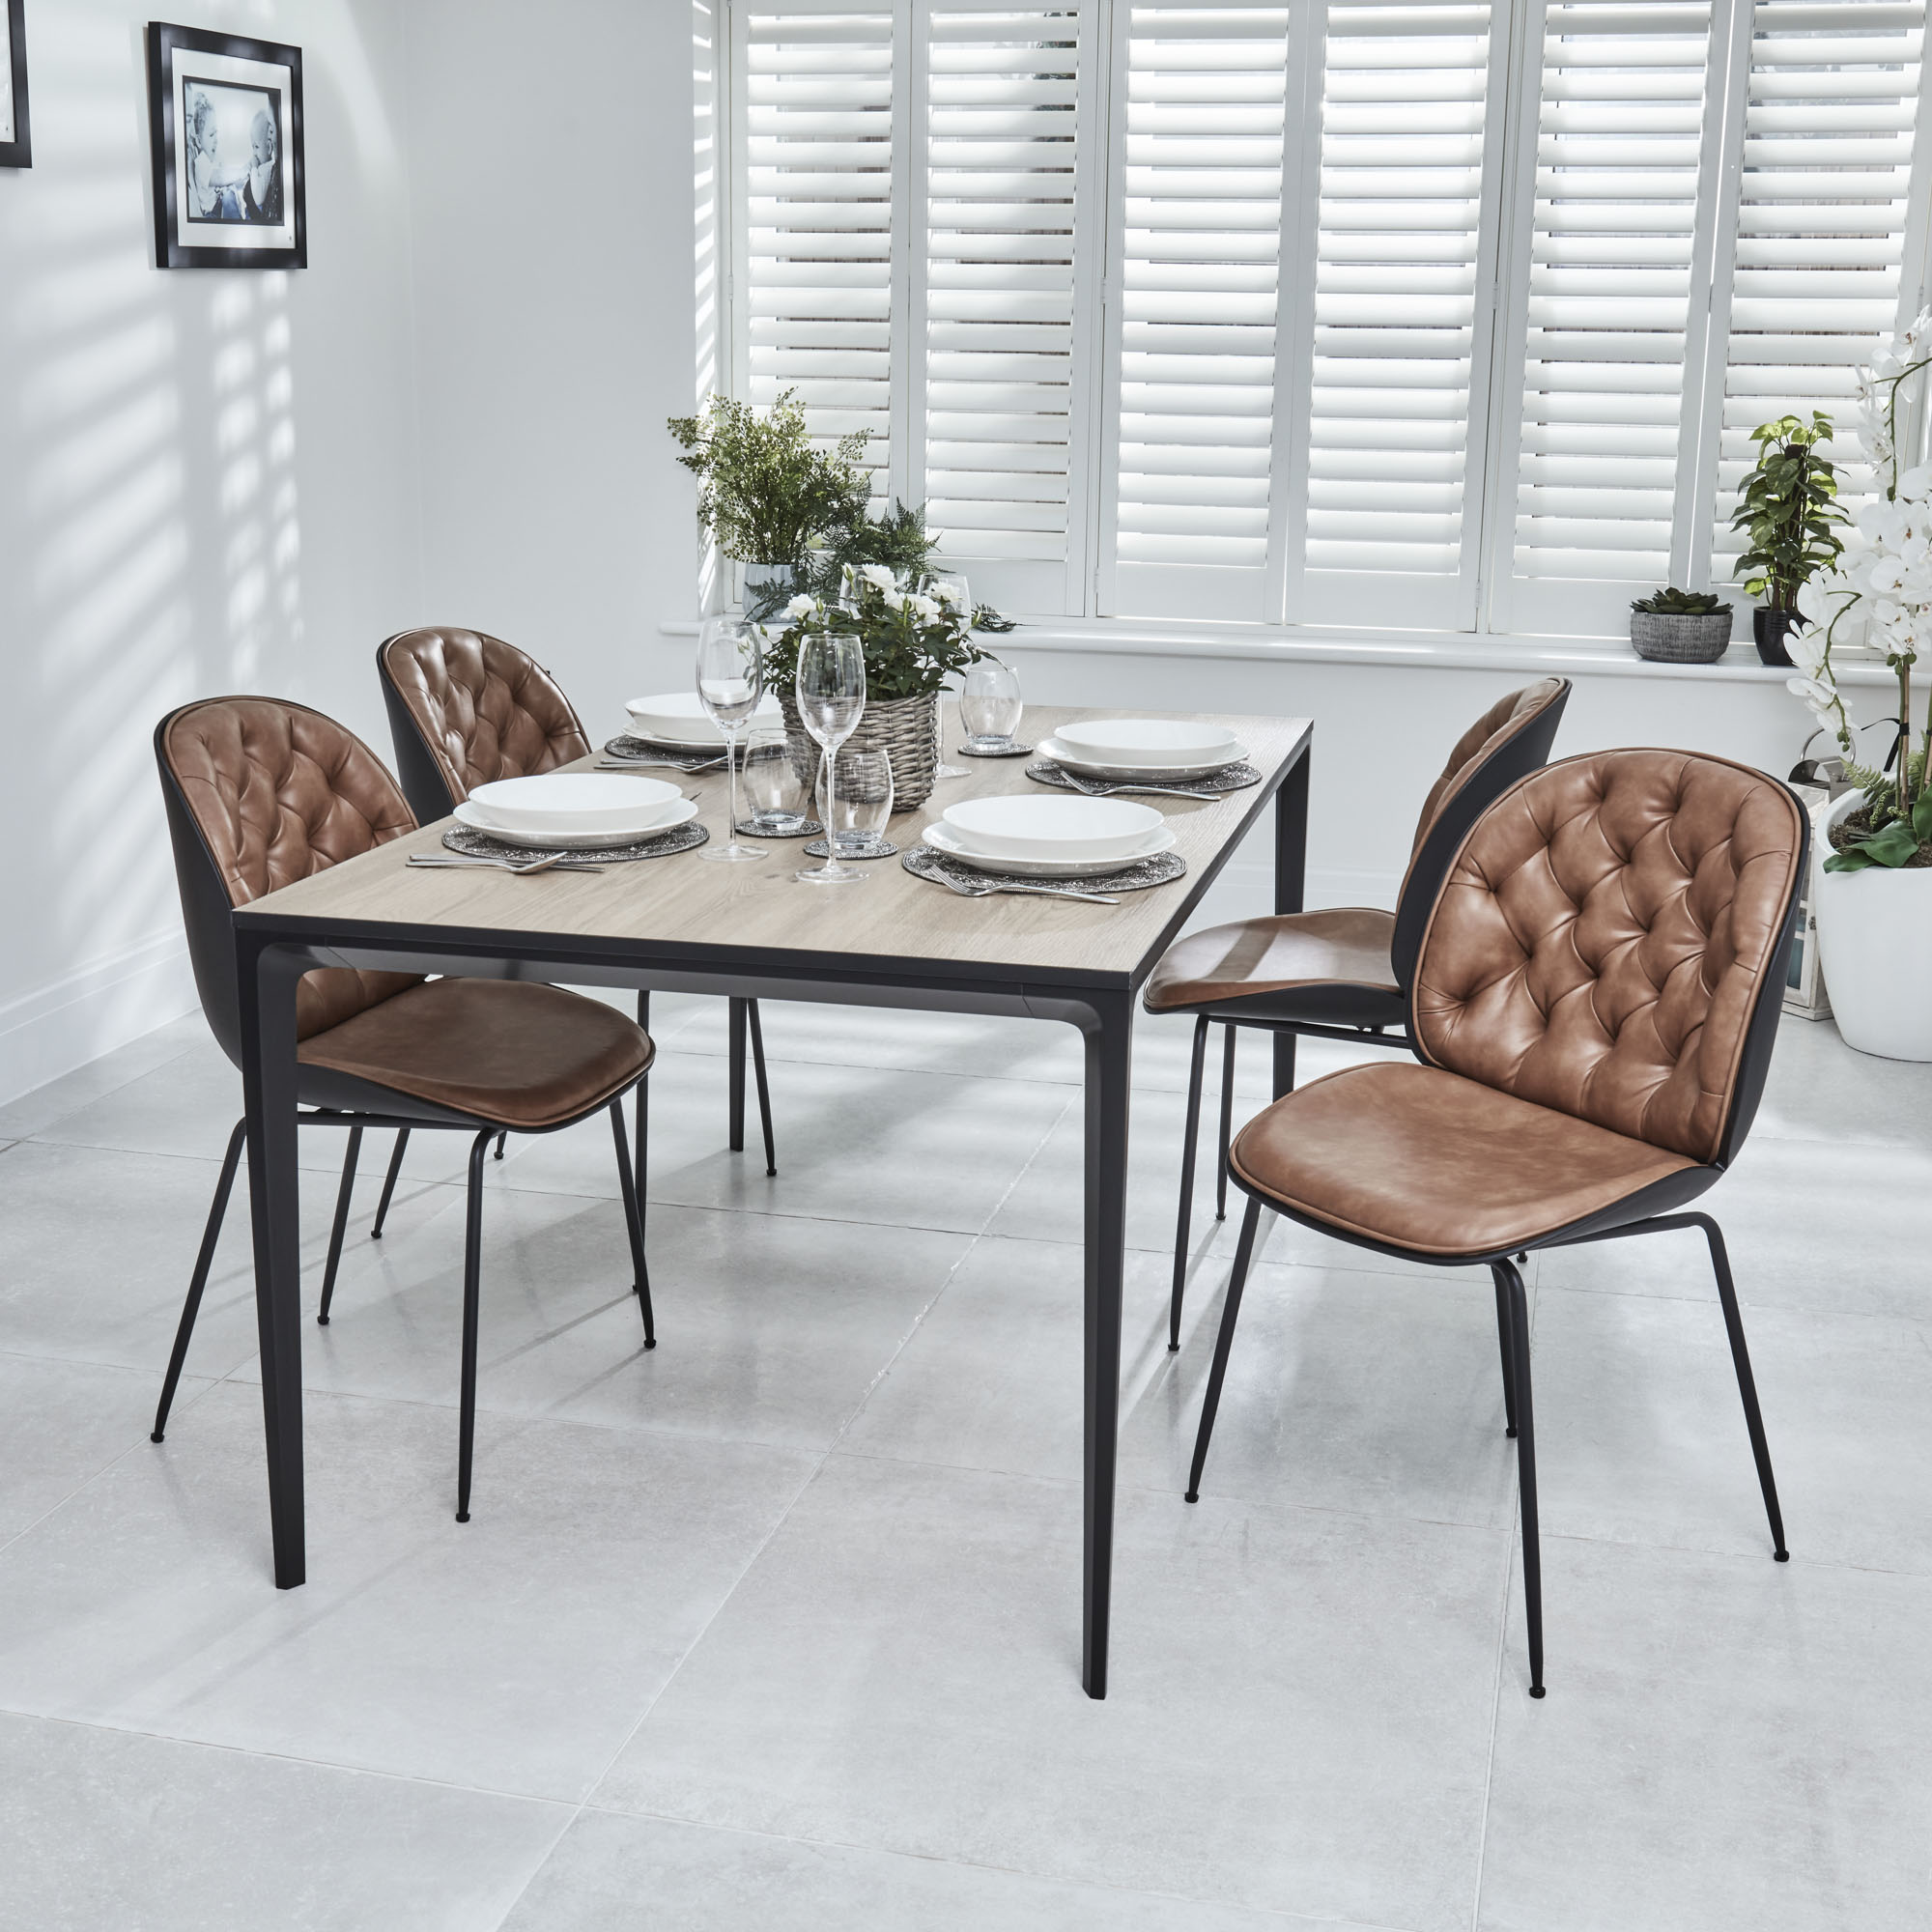 Bellagio 1.6M Natural Oak Melamine Dining Table Set with 4x Thiago Tan Dining Chairs